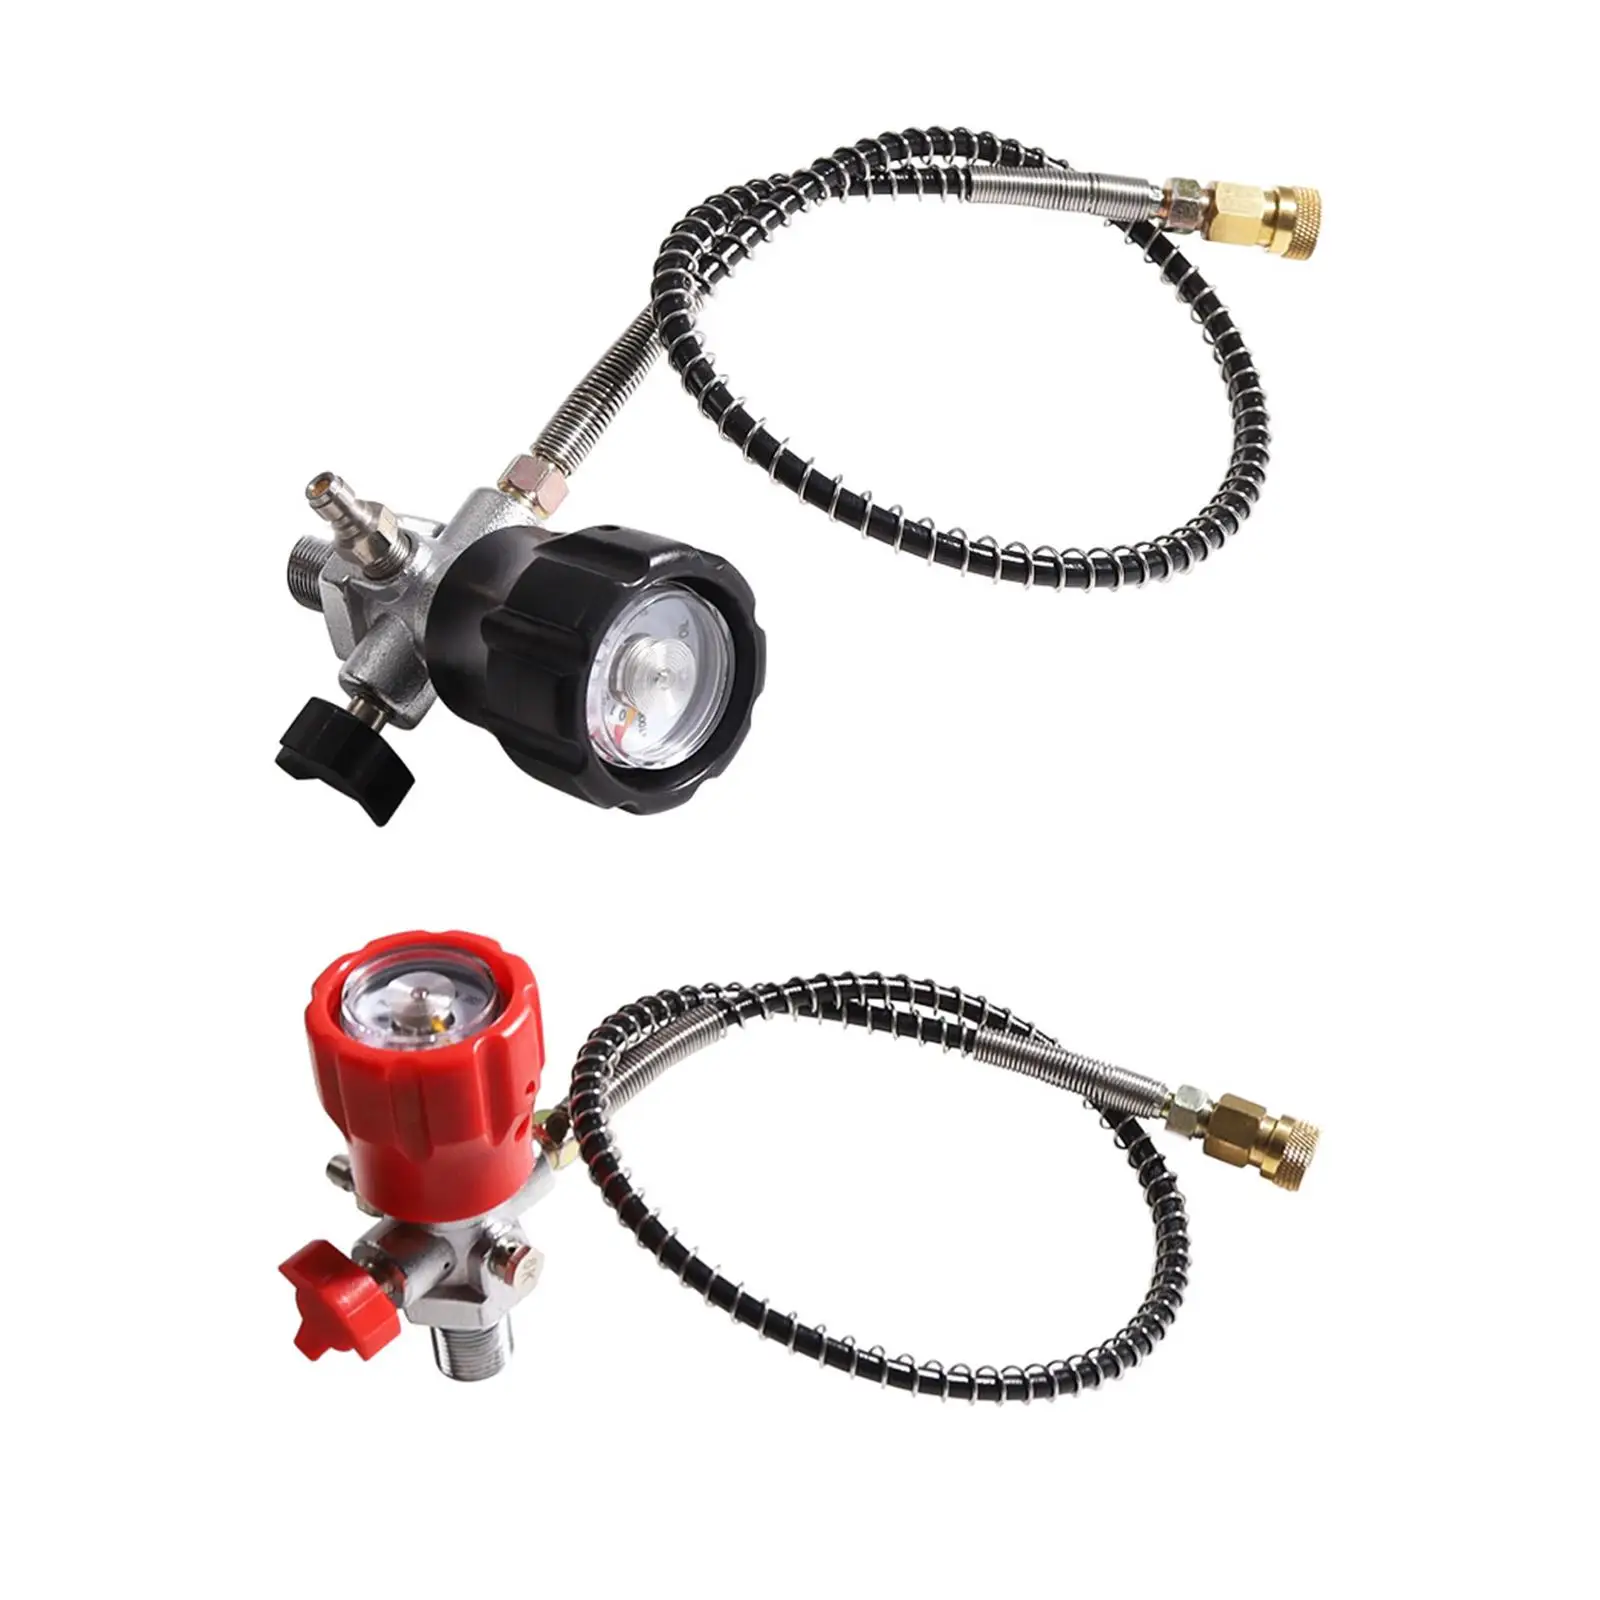 

Fill Station Charging Adapter Hose Accessory Part 24inch Hose with 6000PSI Gauge Cylinder Refill Adapter for Air Tank Pumps